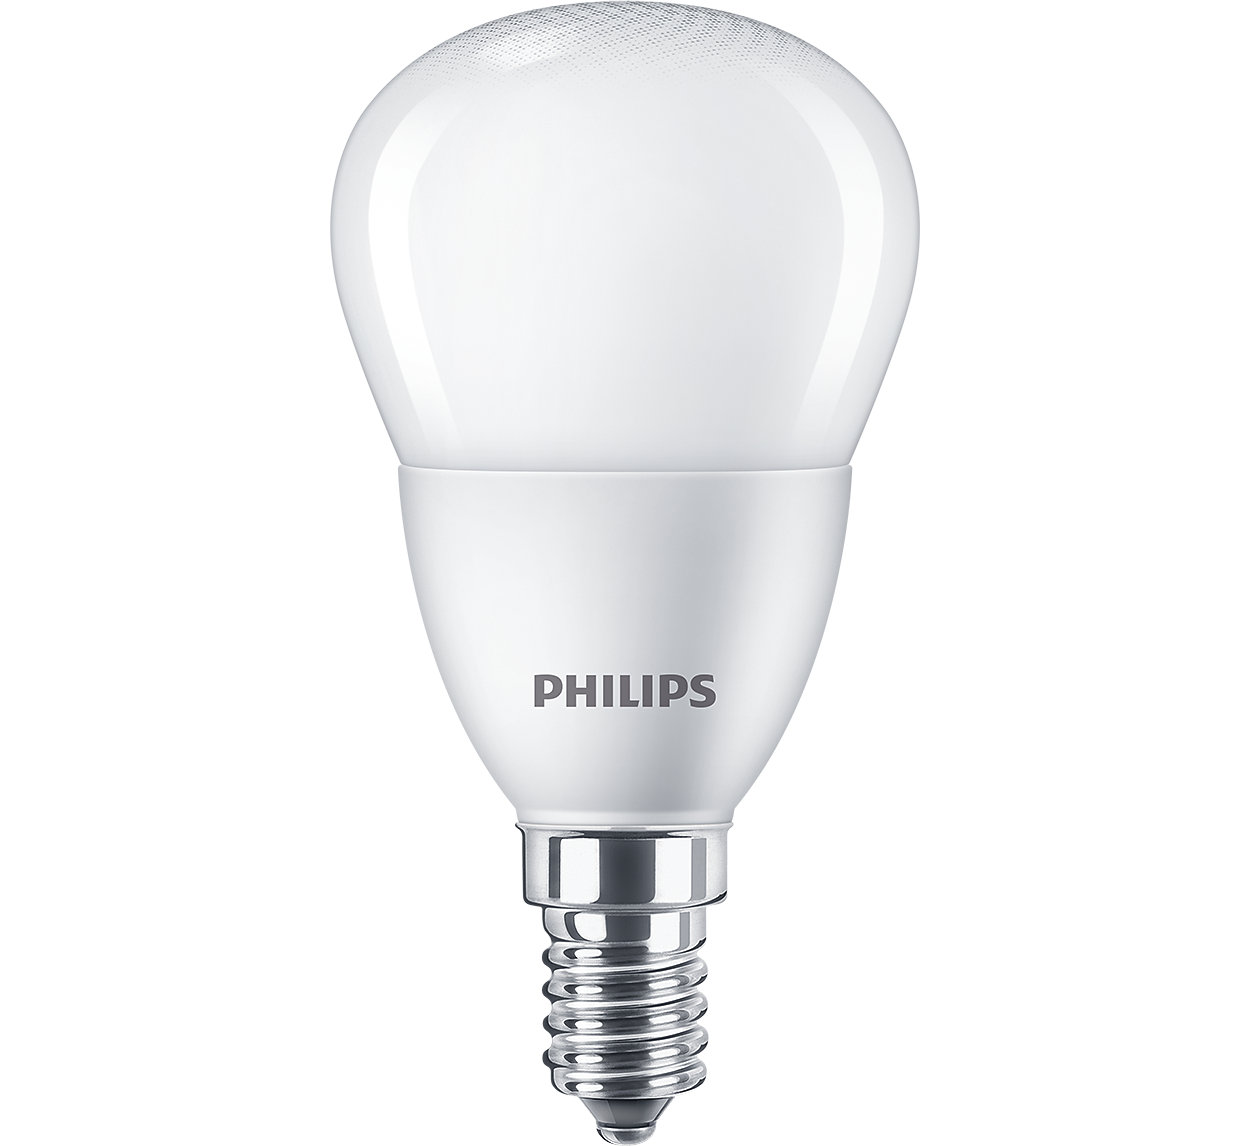 Beautify your home with Philips LED globe bulbs